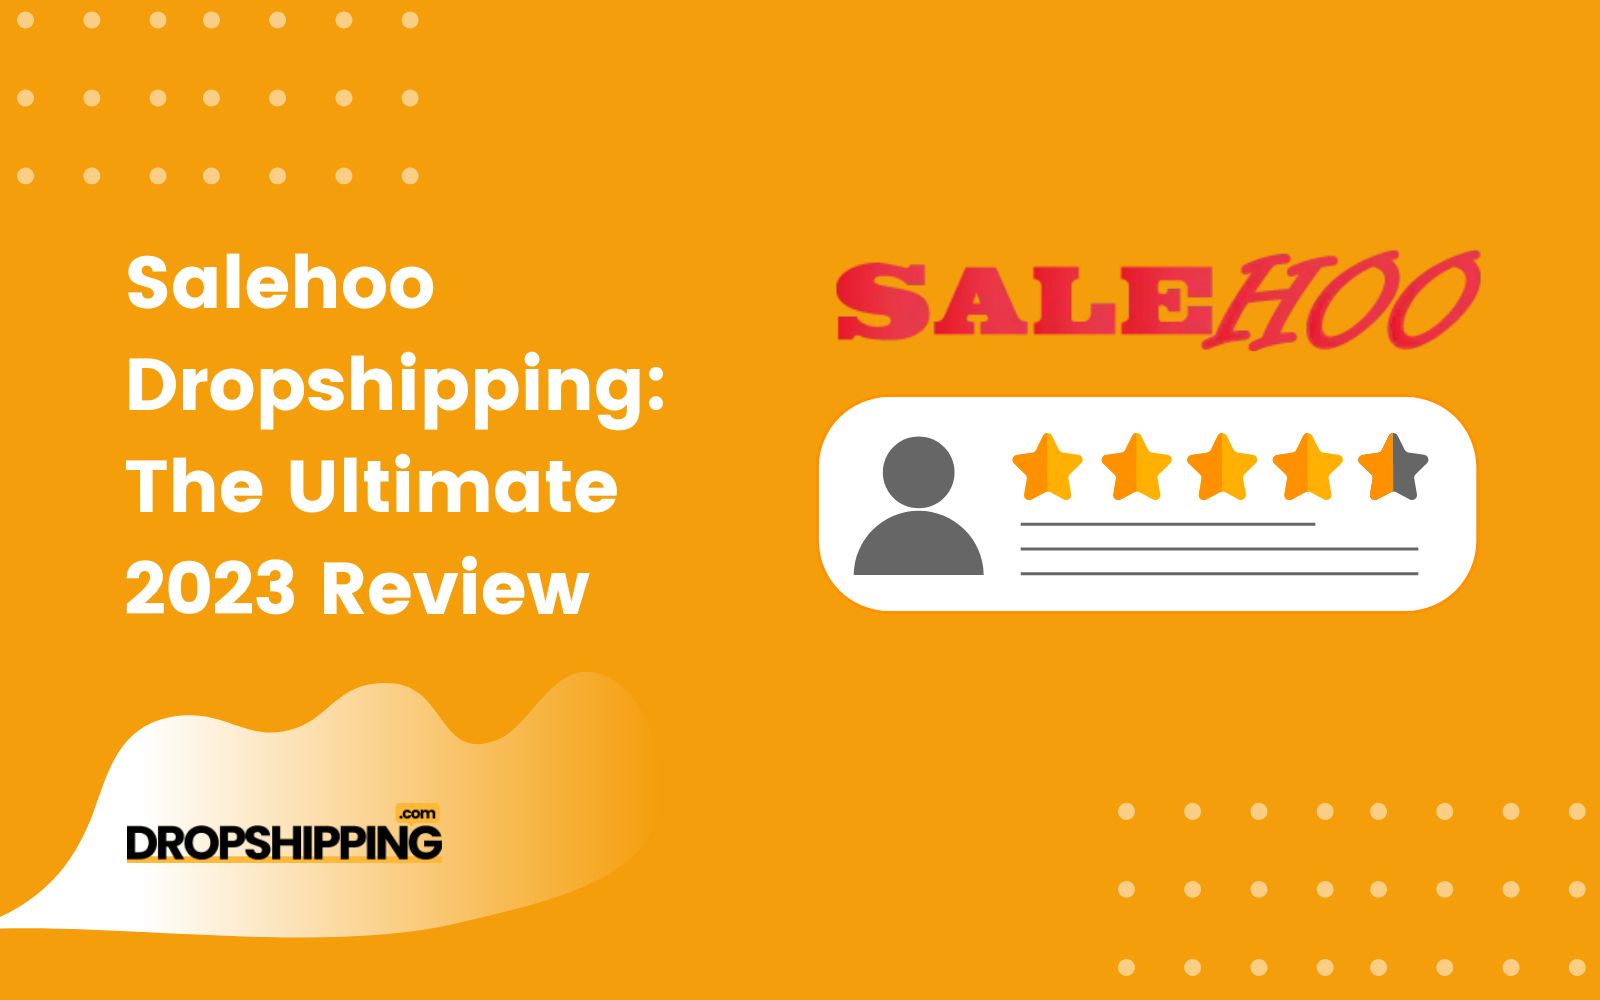 How To Find The Time To Salehoo Review On Google in 2021